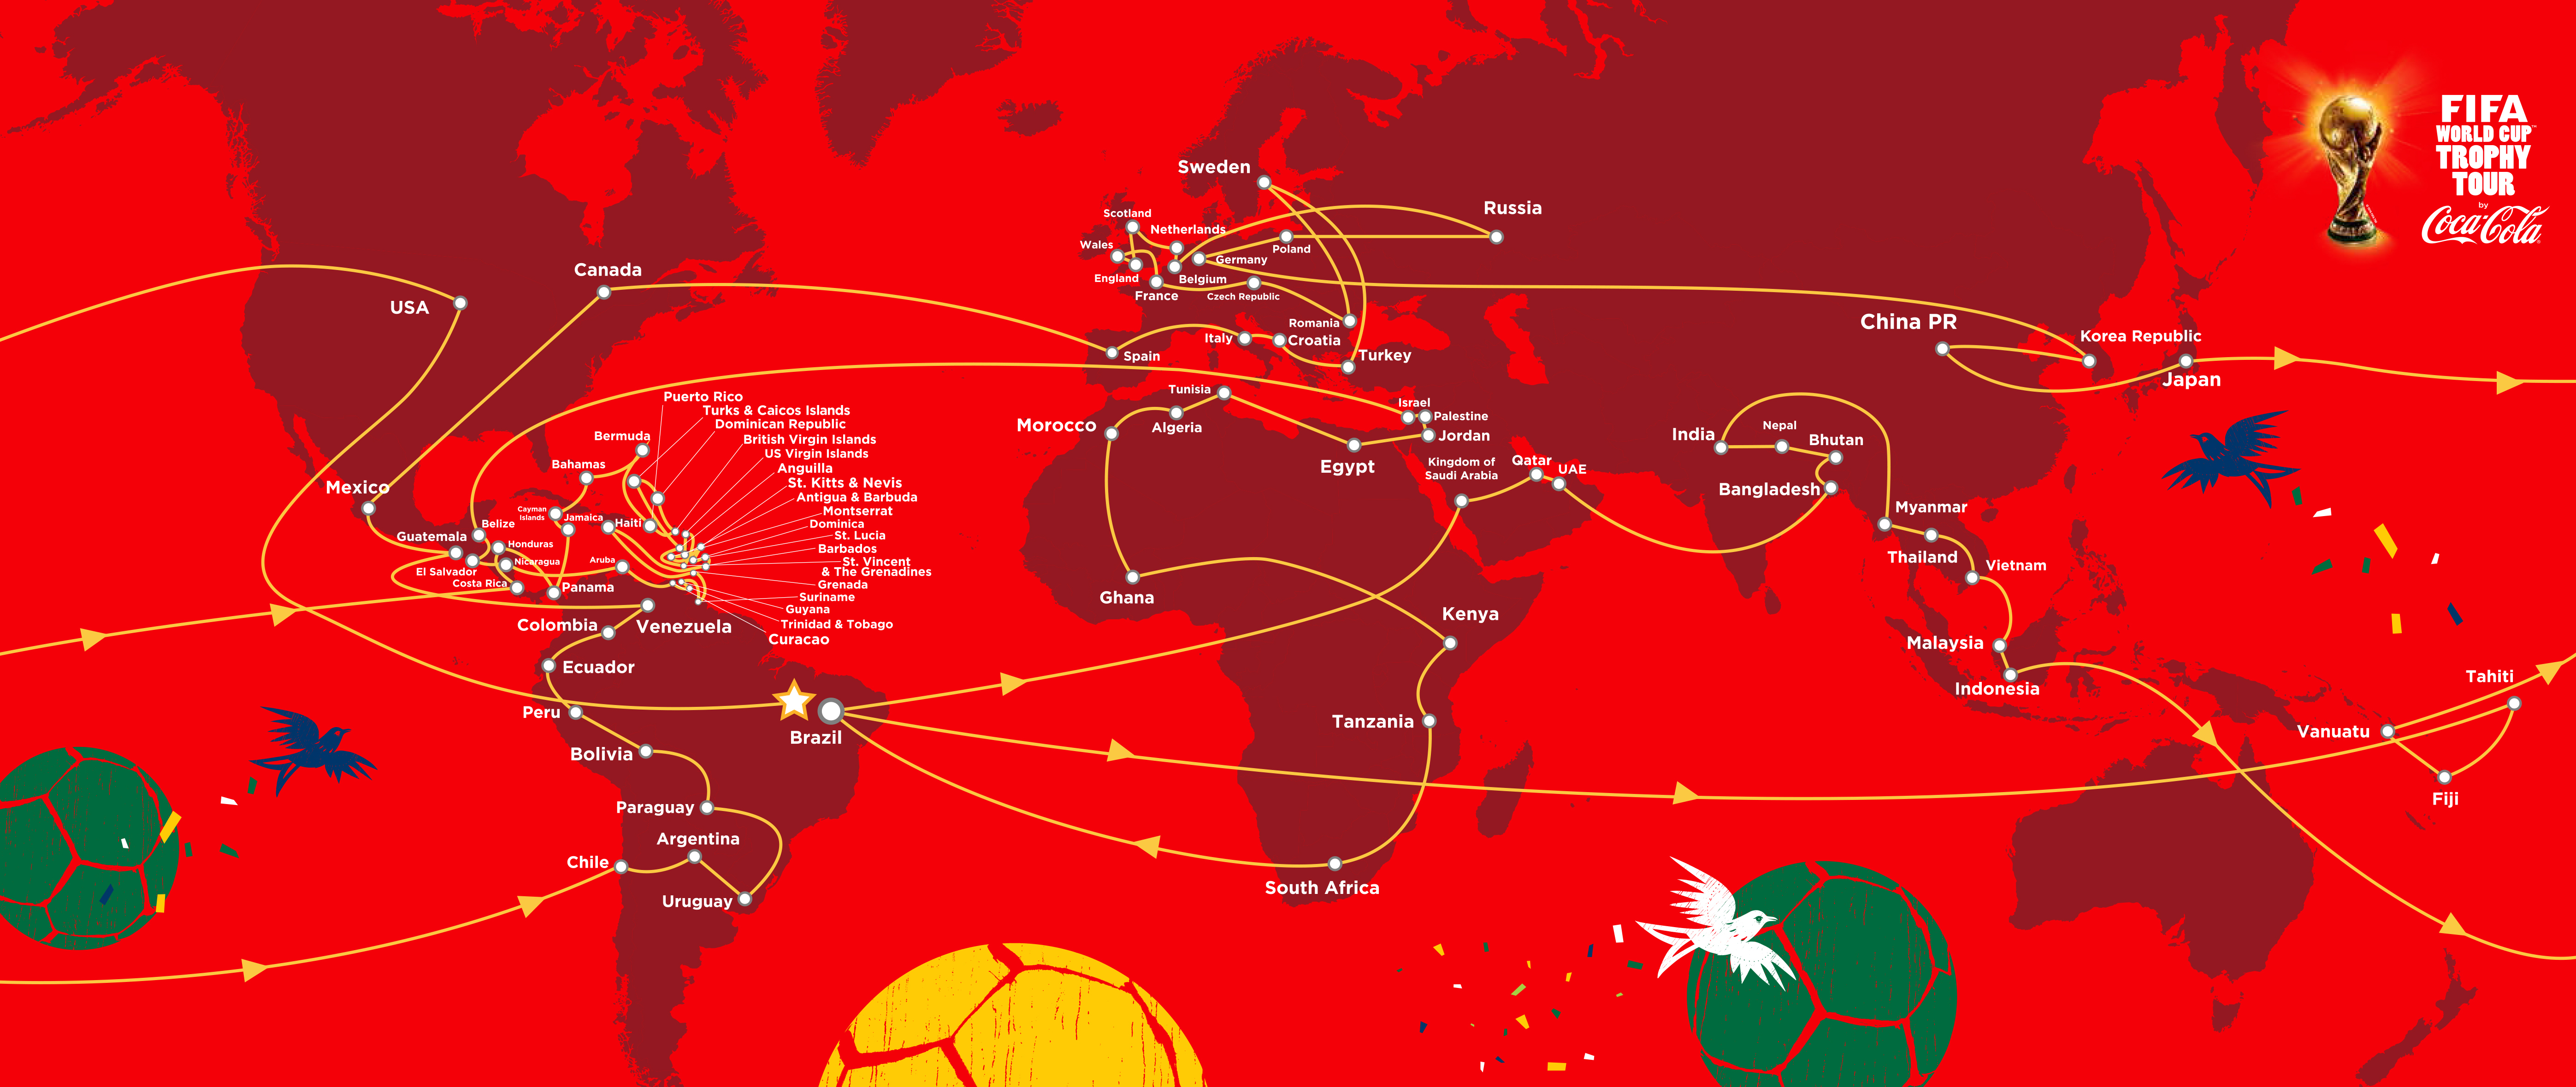 FIFA World Cup Trophy Tour by Coca-Cola